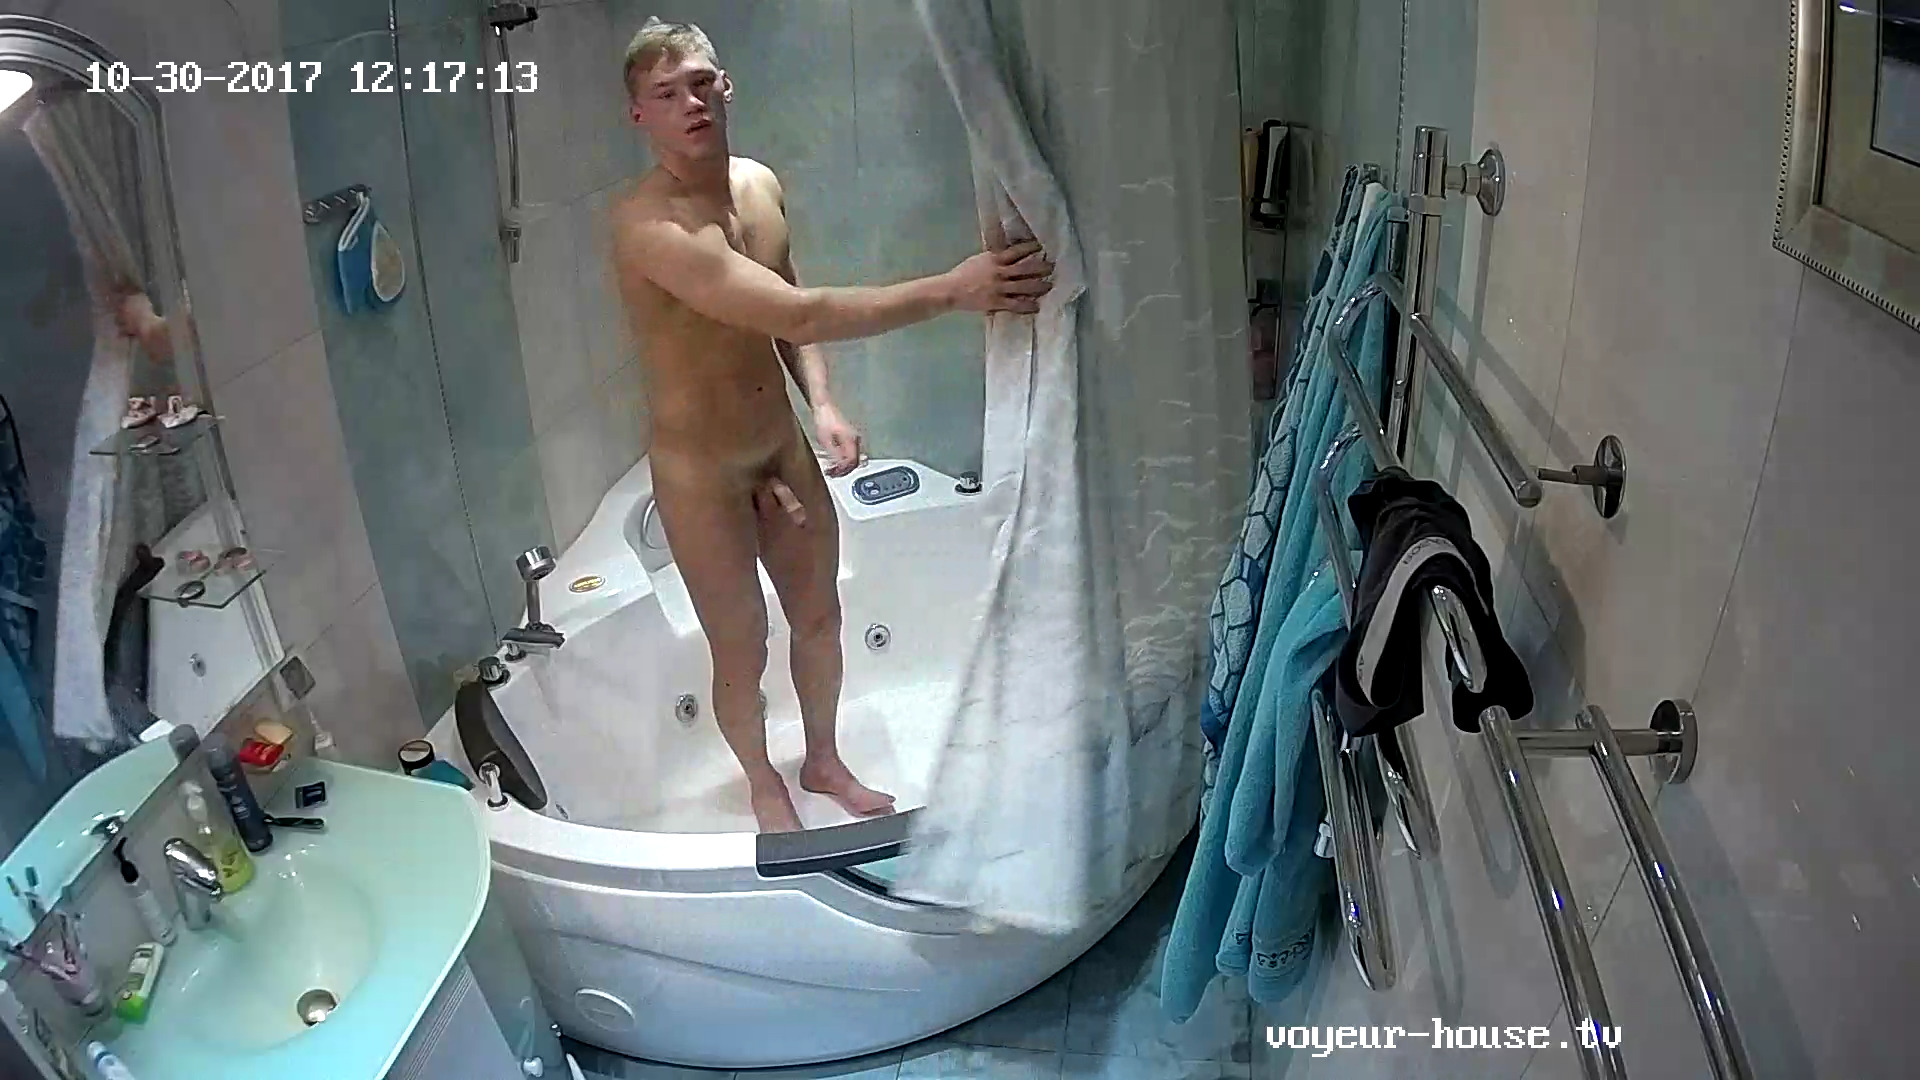 Blond guest guy after shower 30th Oct 2017